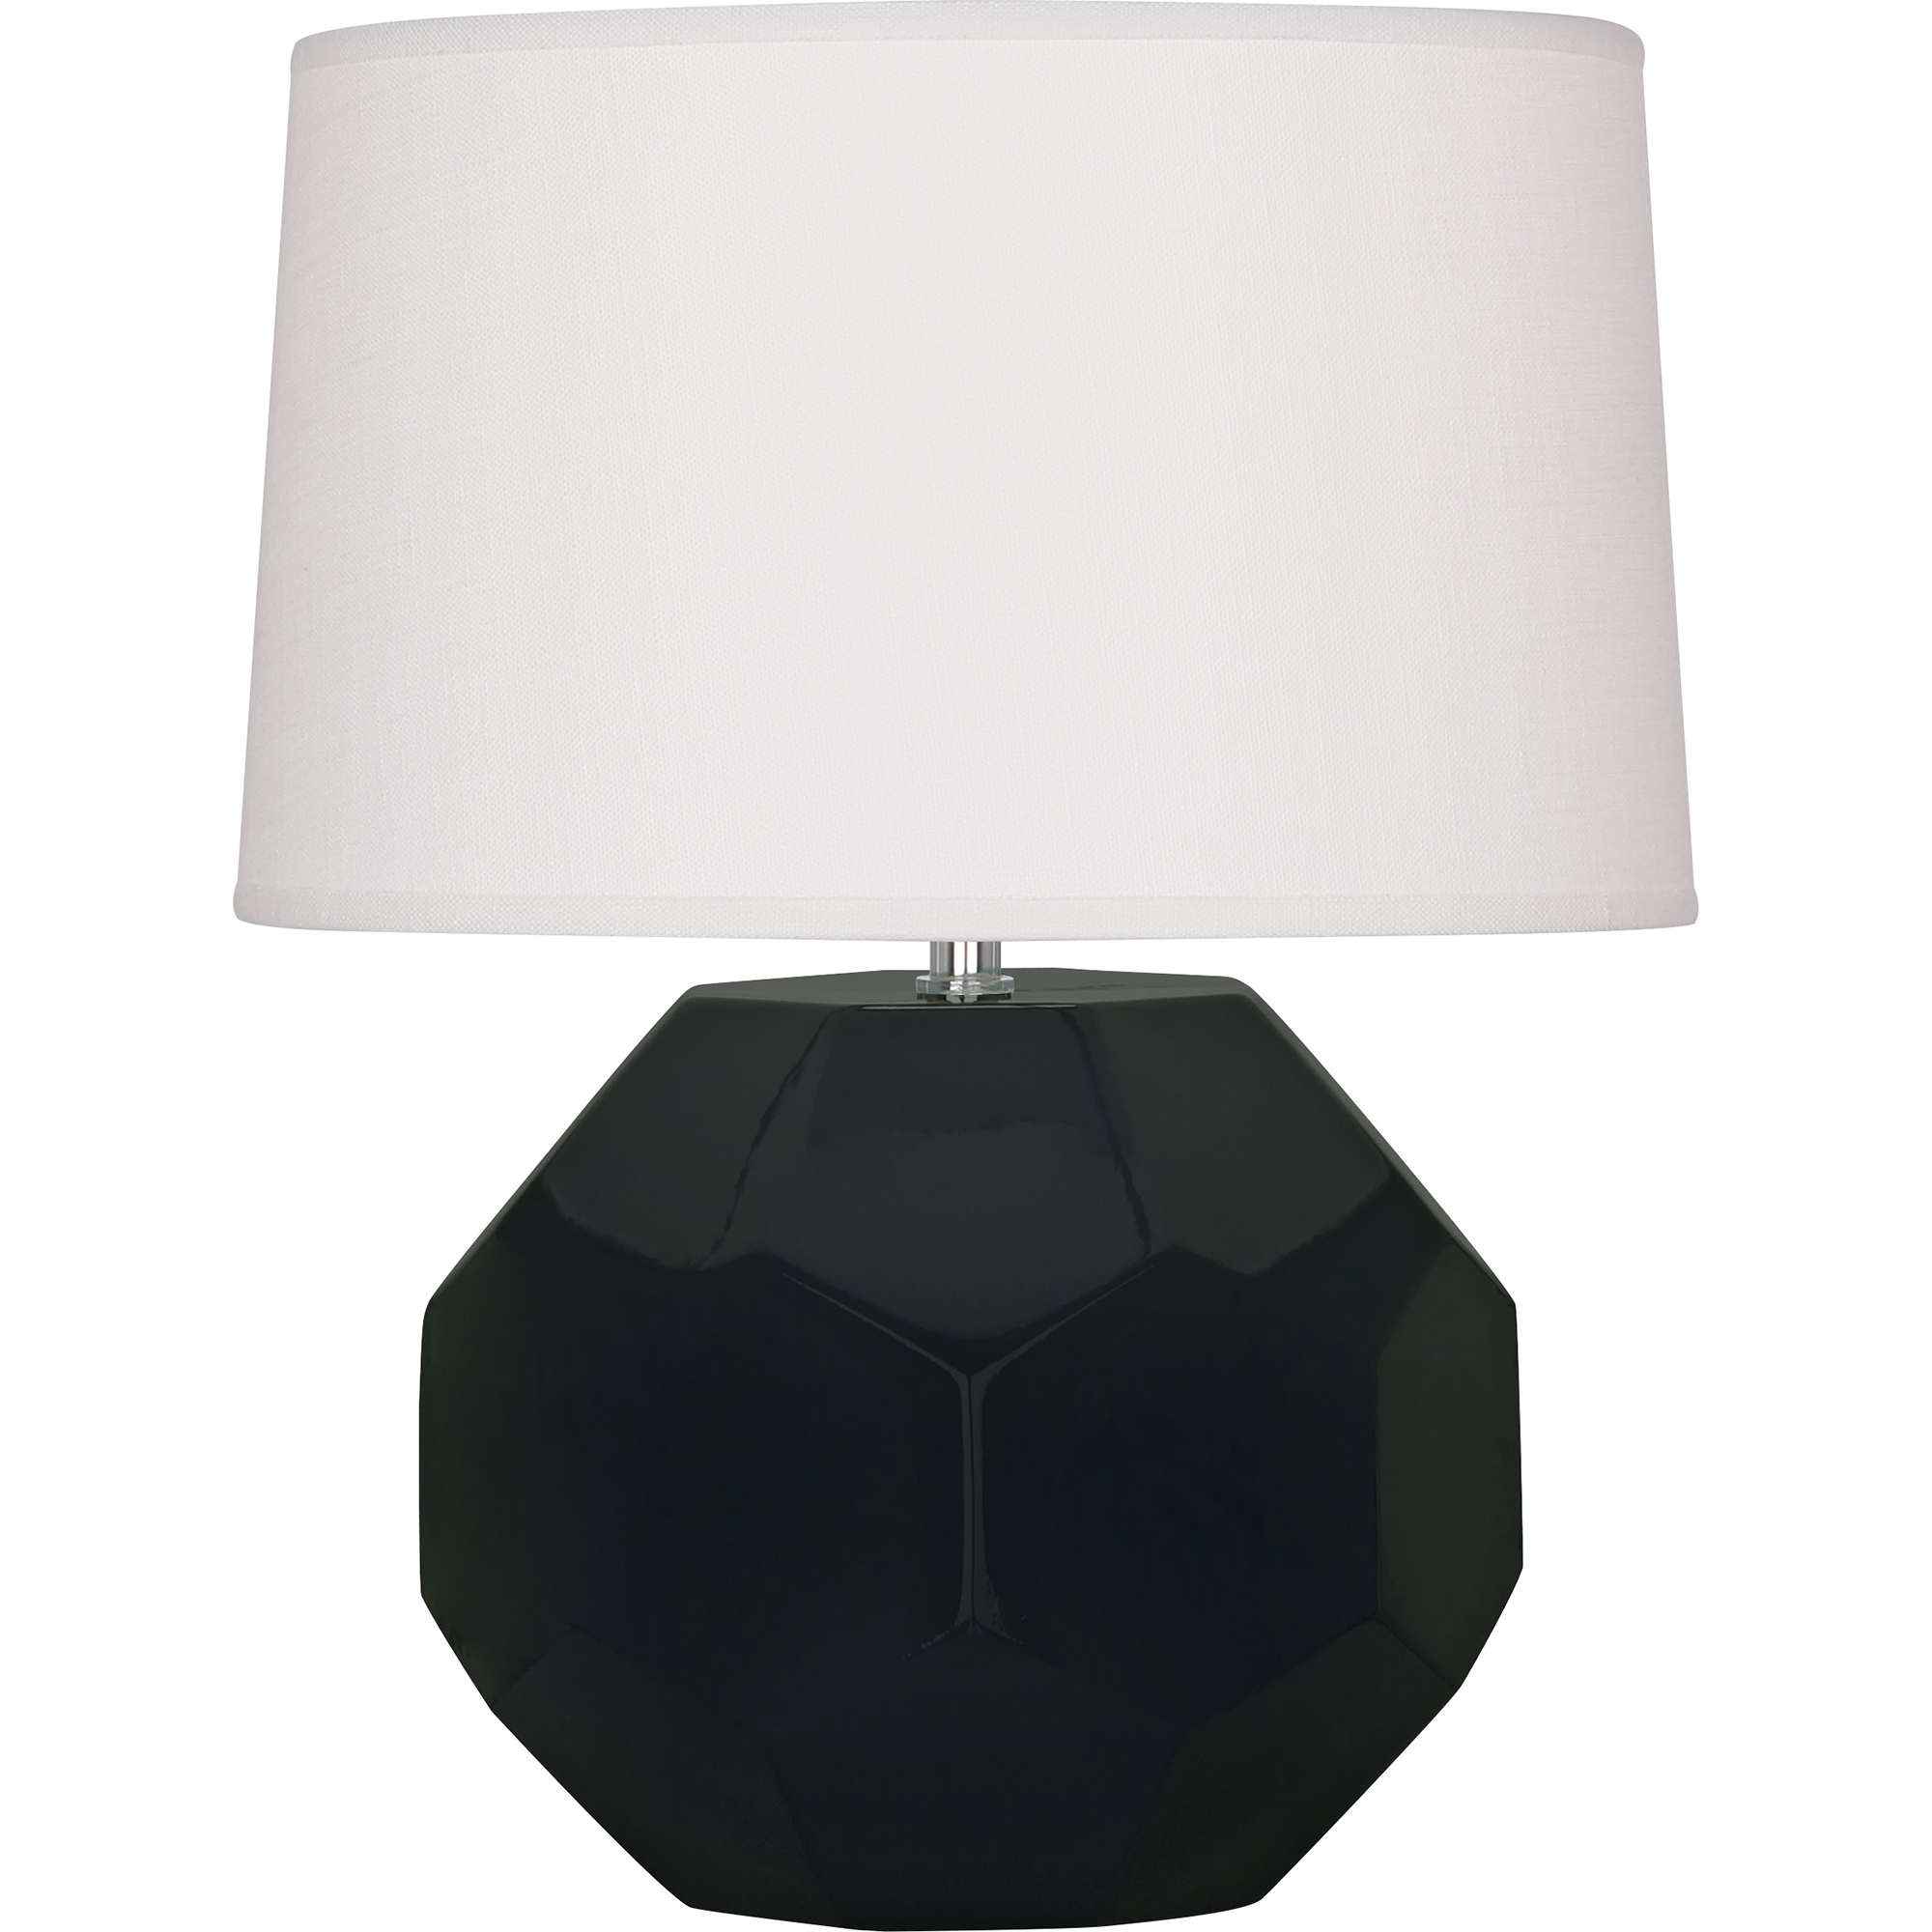 Franklin Table Lamp Style #OS01